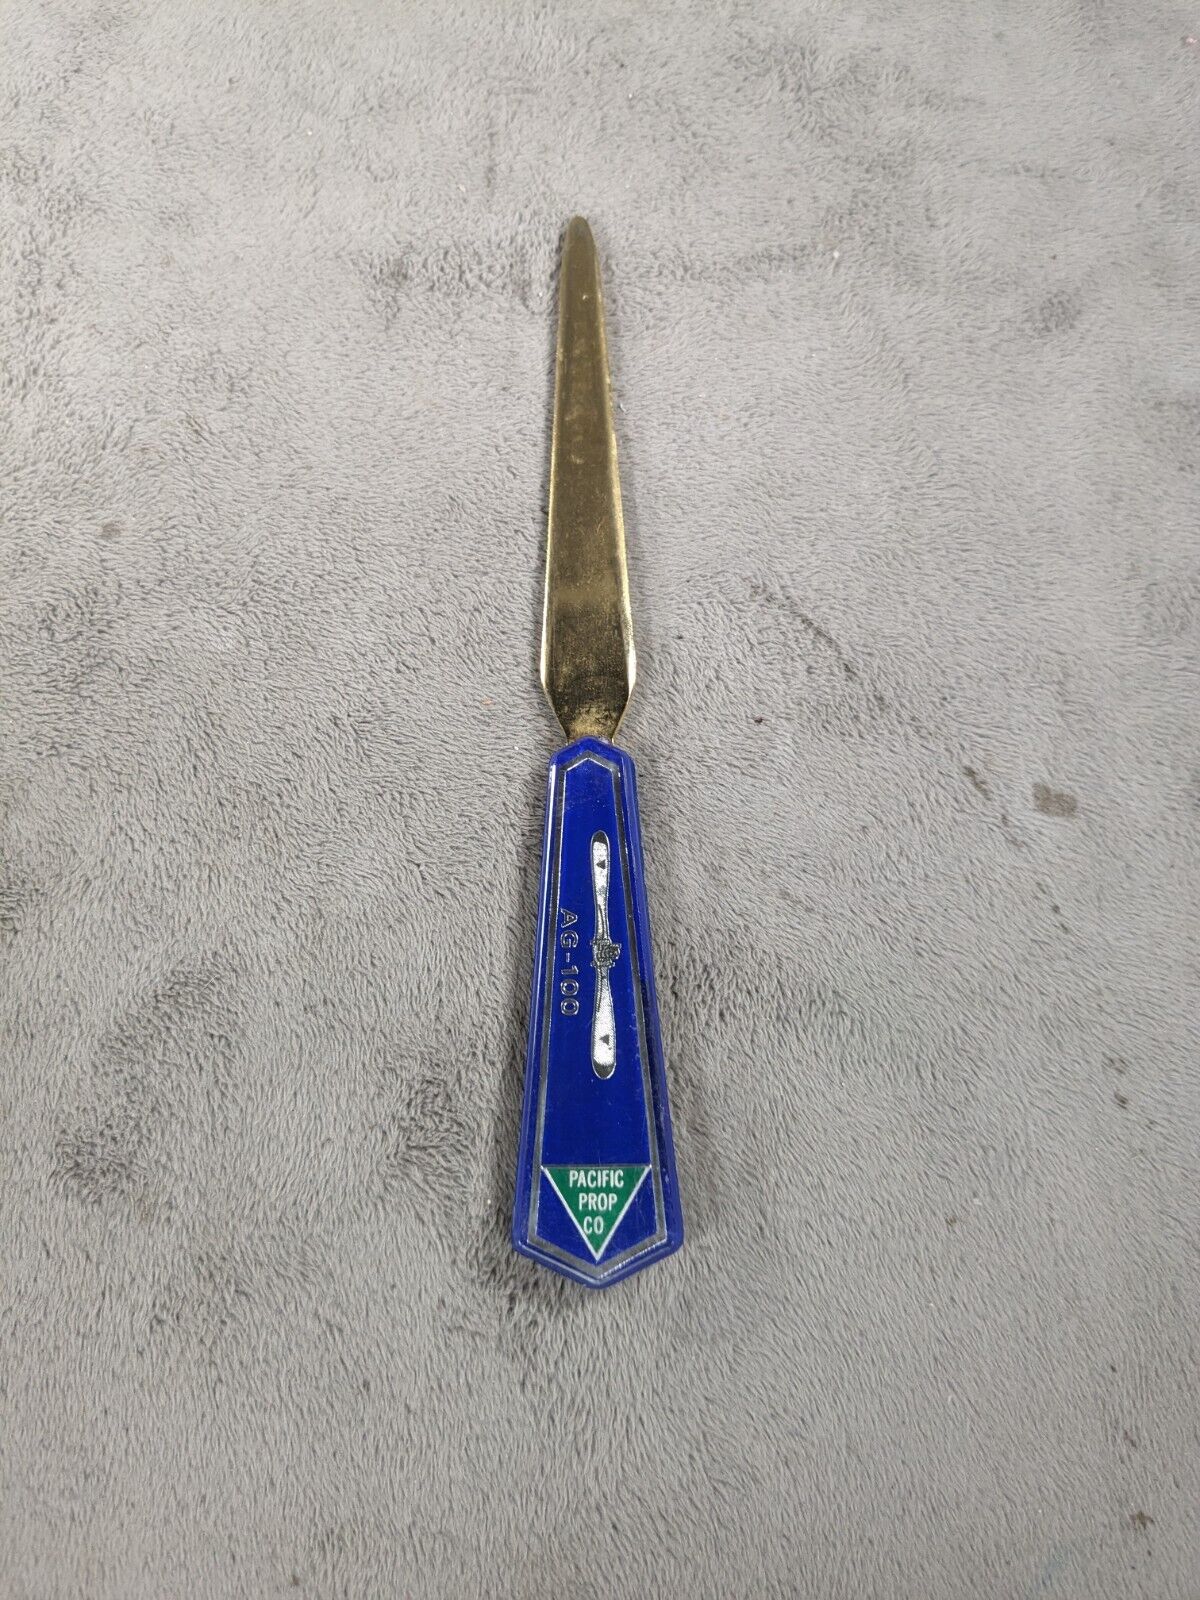 Pacific Drop Letter Opener Brass With Blue Cobalt Handle 7.25” AG-100